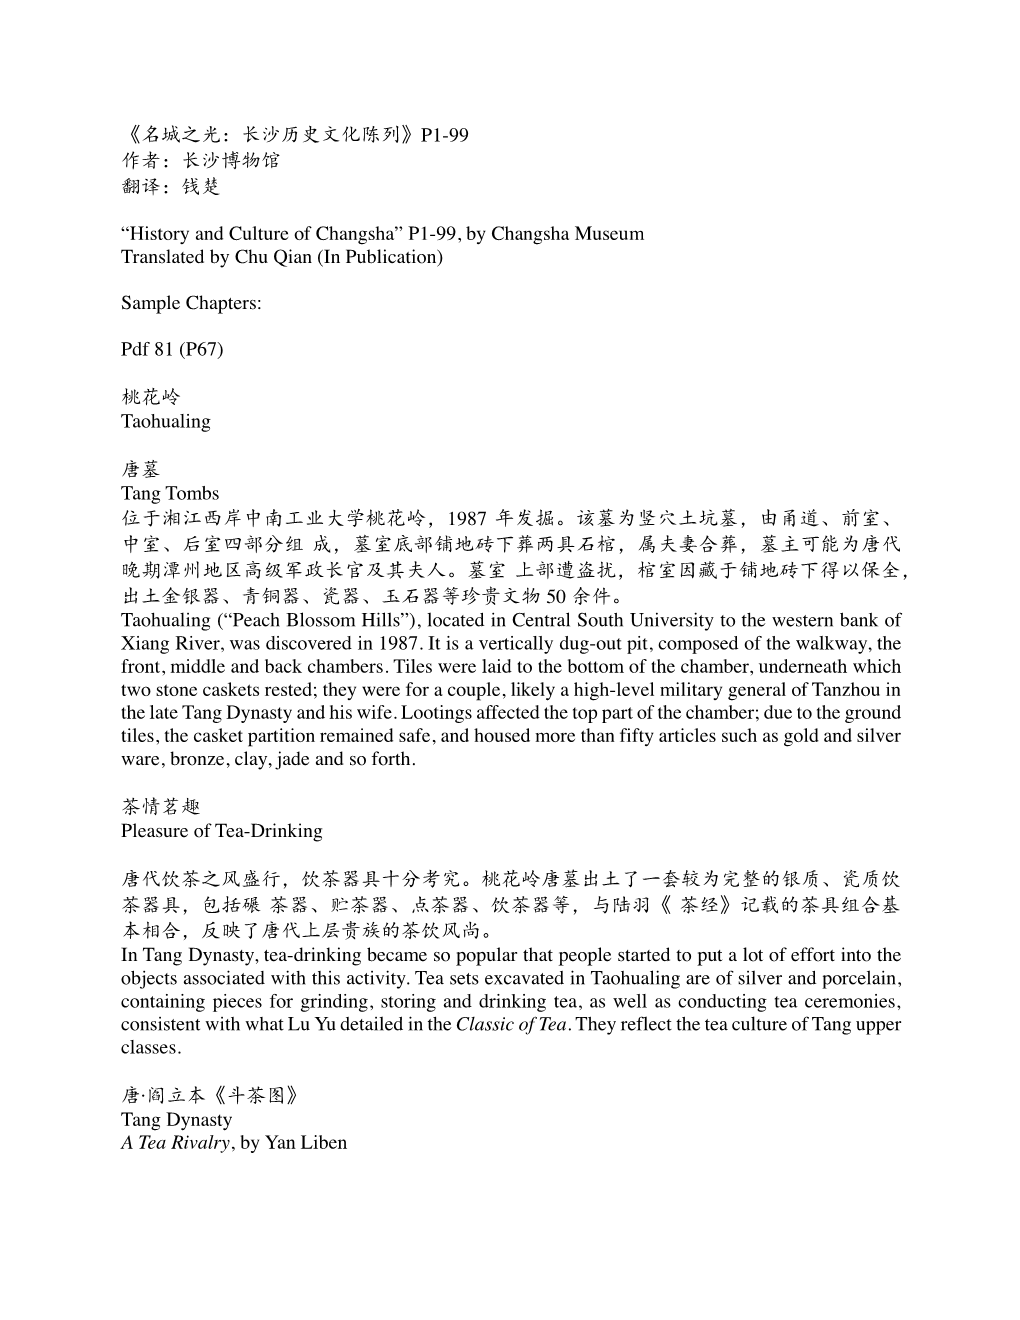 P1-99, by Changsha Museum Translated by Chu Qian (In Publication)